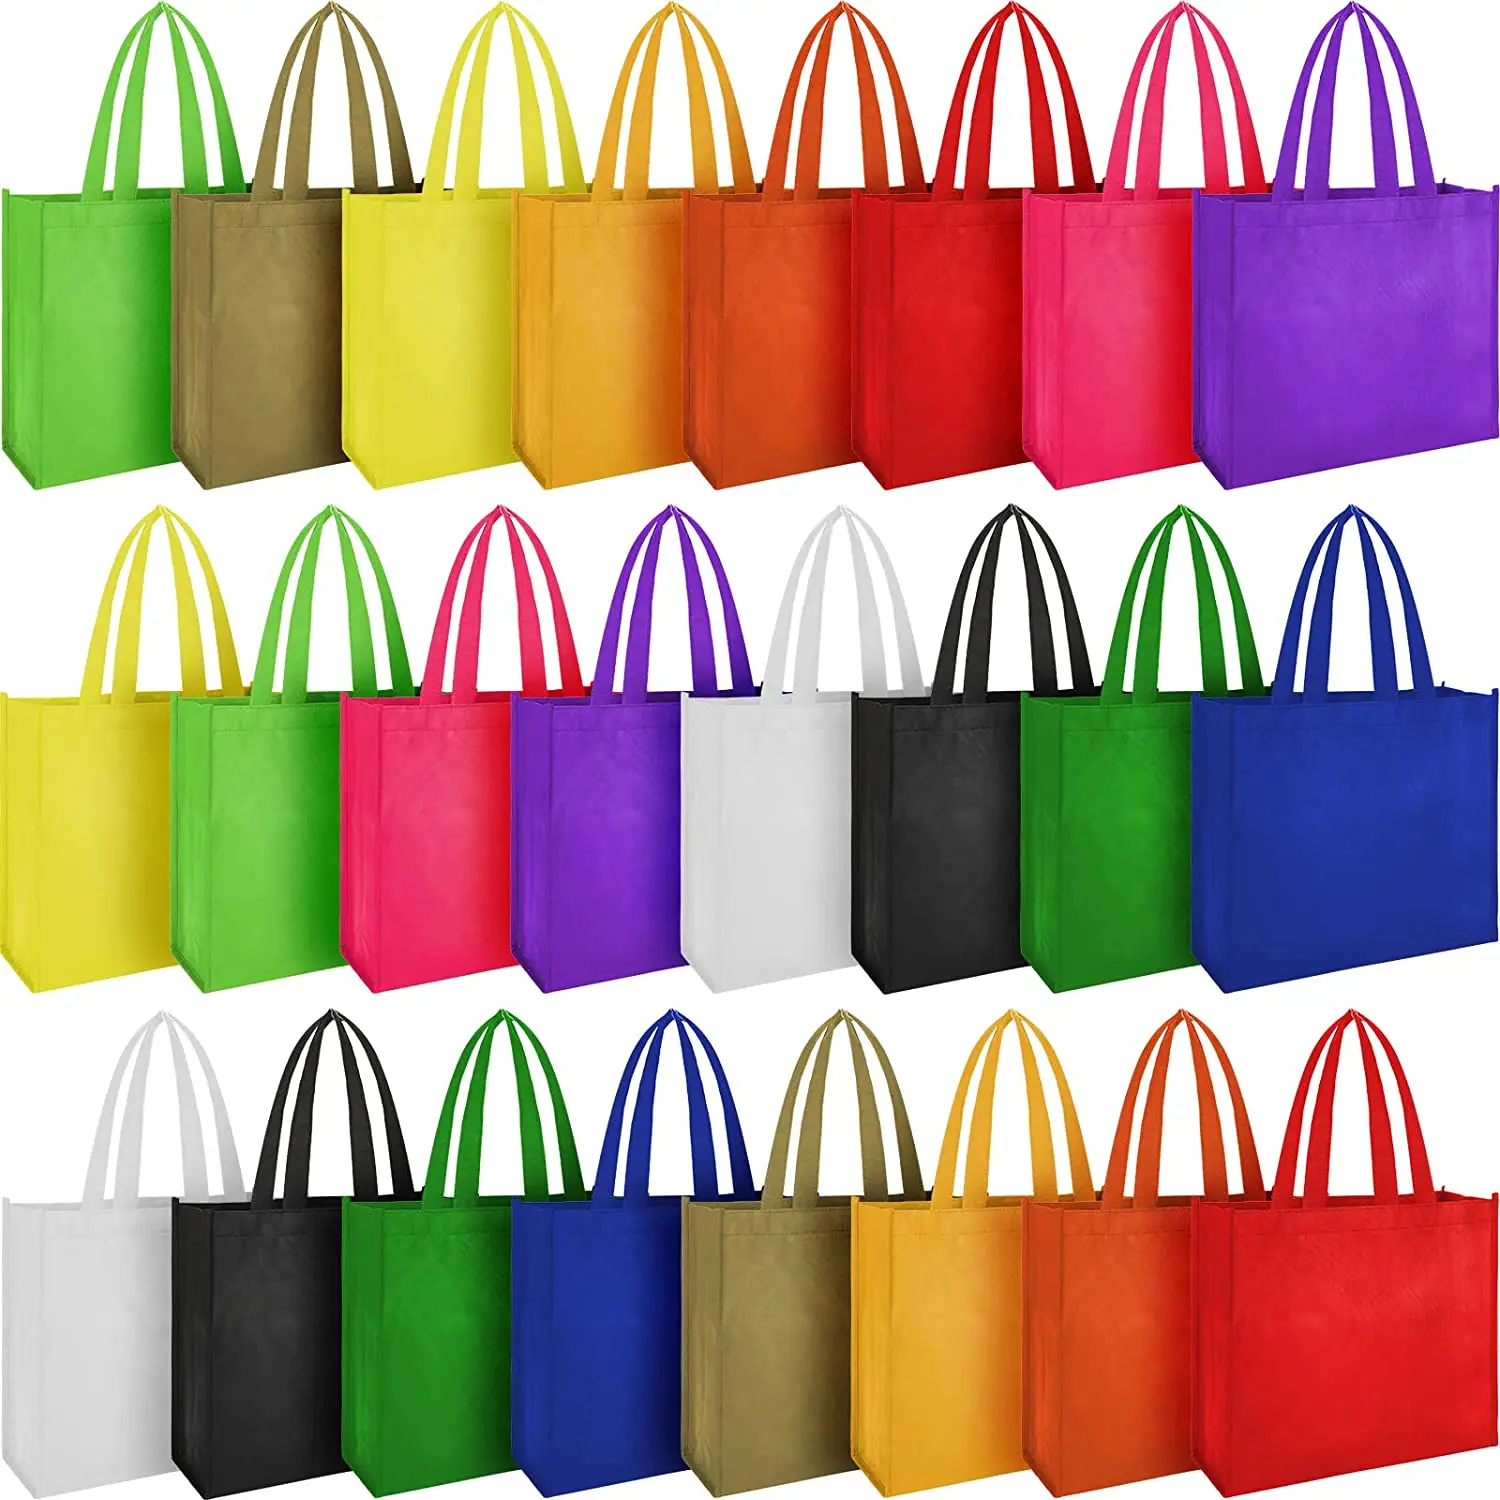 Cloth Bag for Small Business Logo Customized Tote Bag for Clothing Fabric Pouch Non Woven Bag (Printing Fee is not Included)